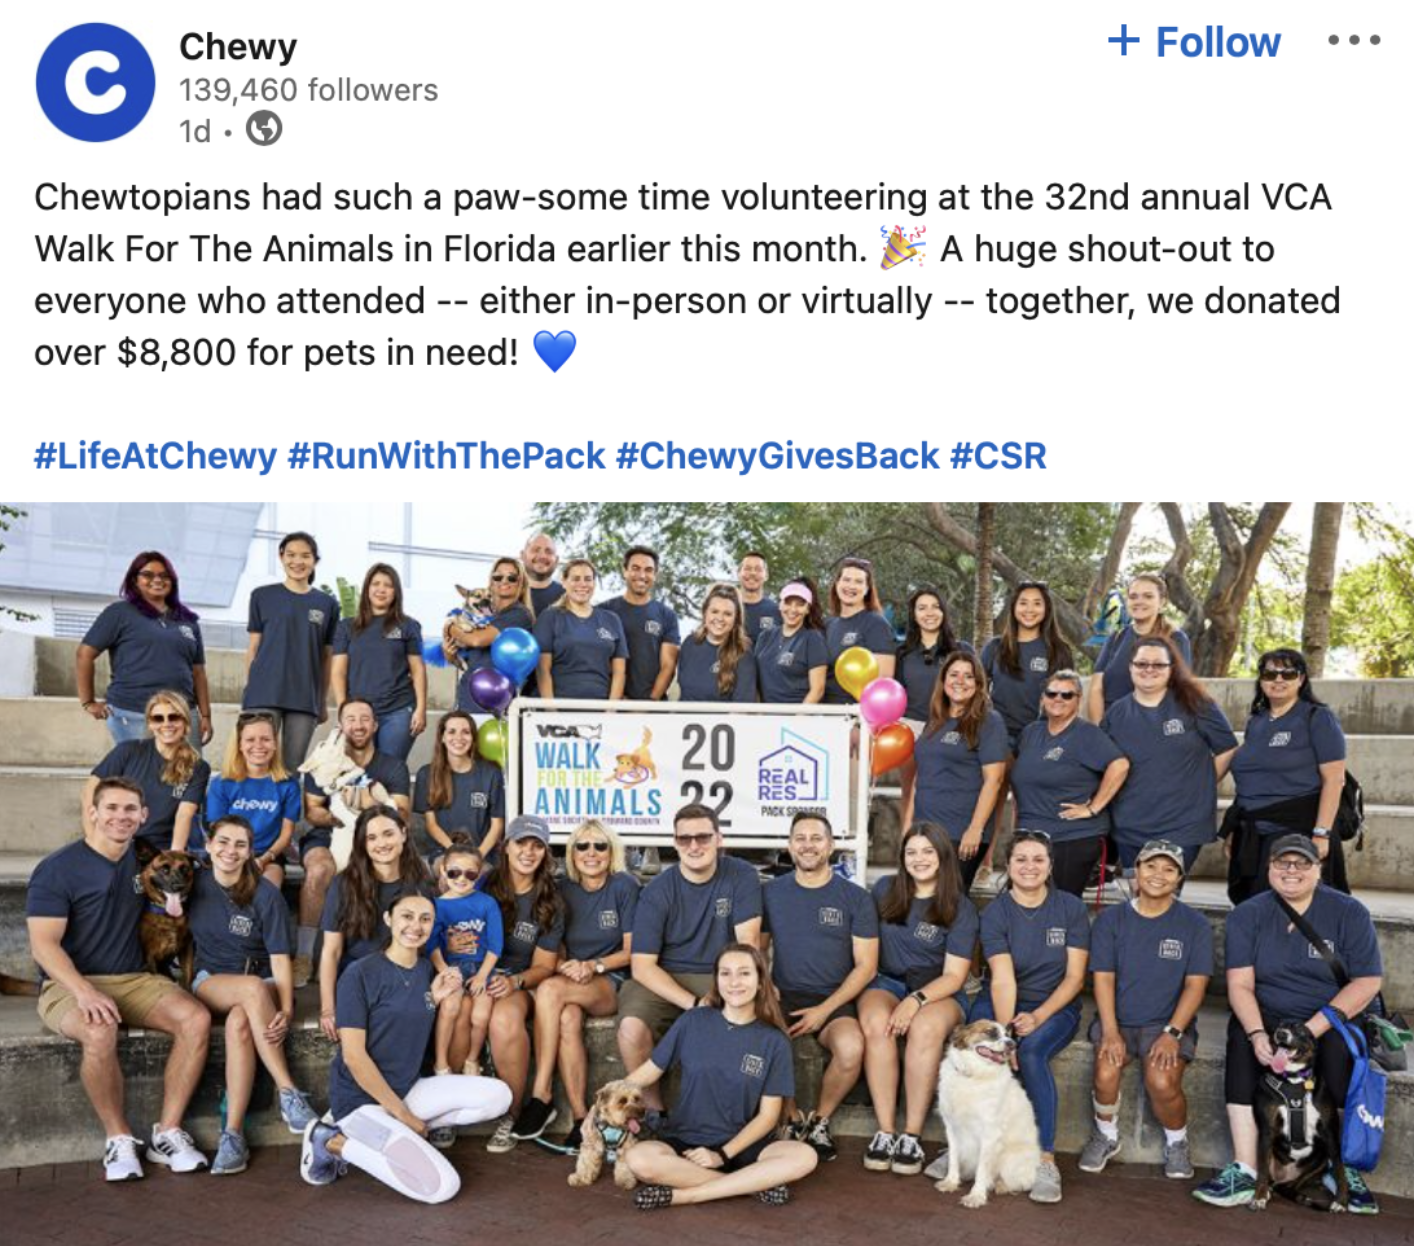 Chewy employer branding twitter post with picture of their team volunteering at the VCA Walk For Animals